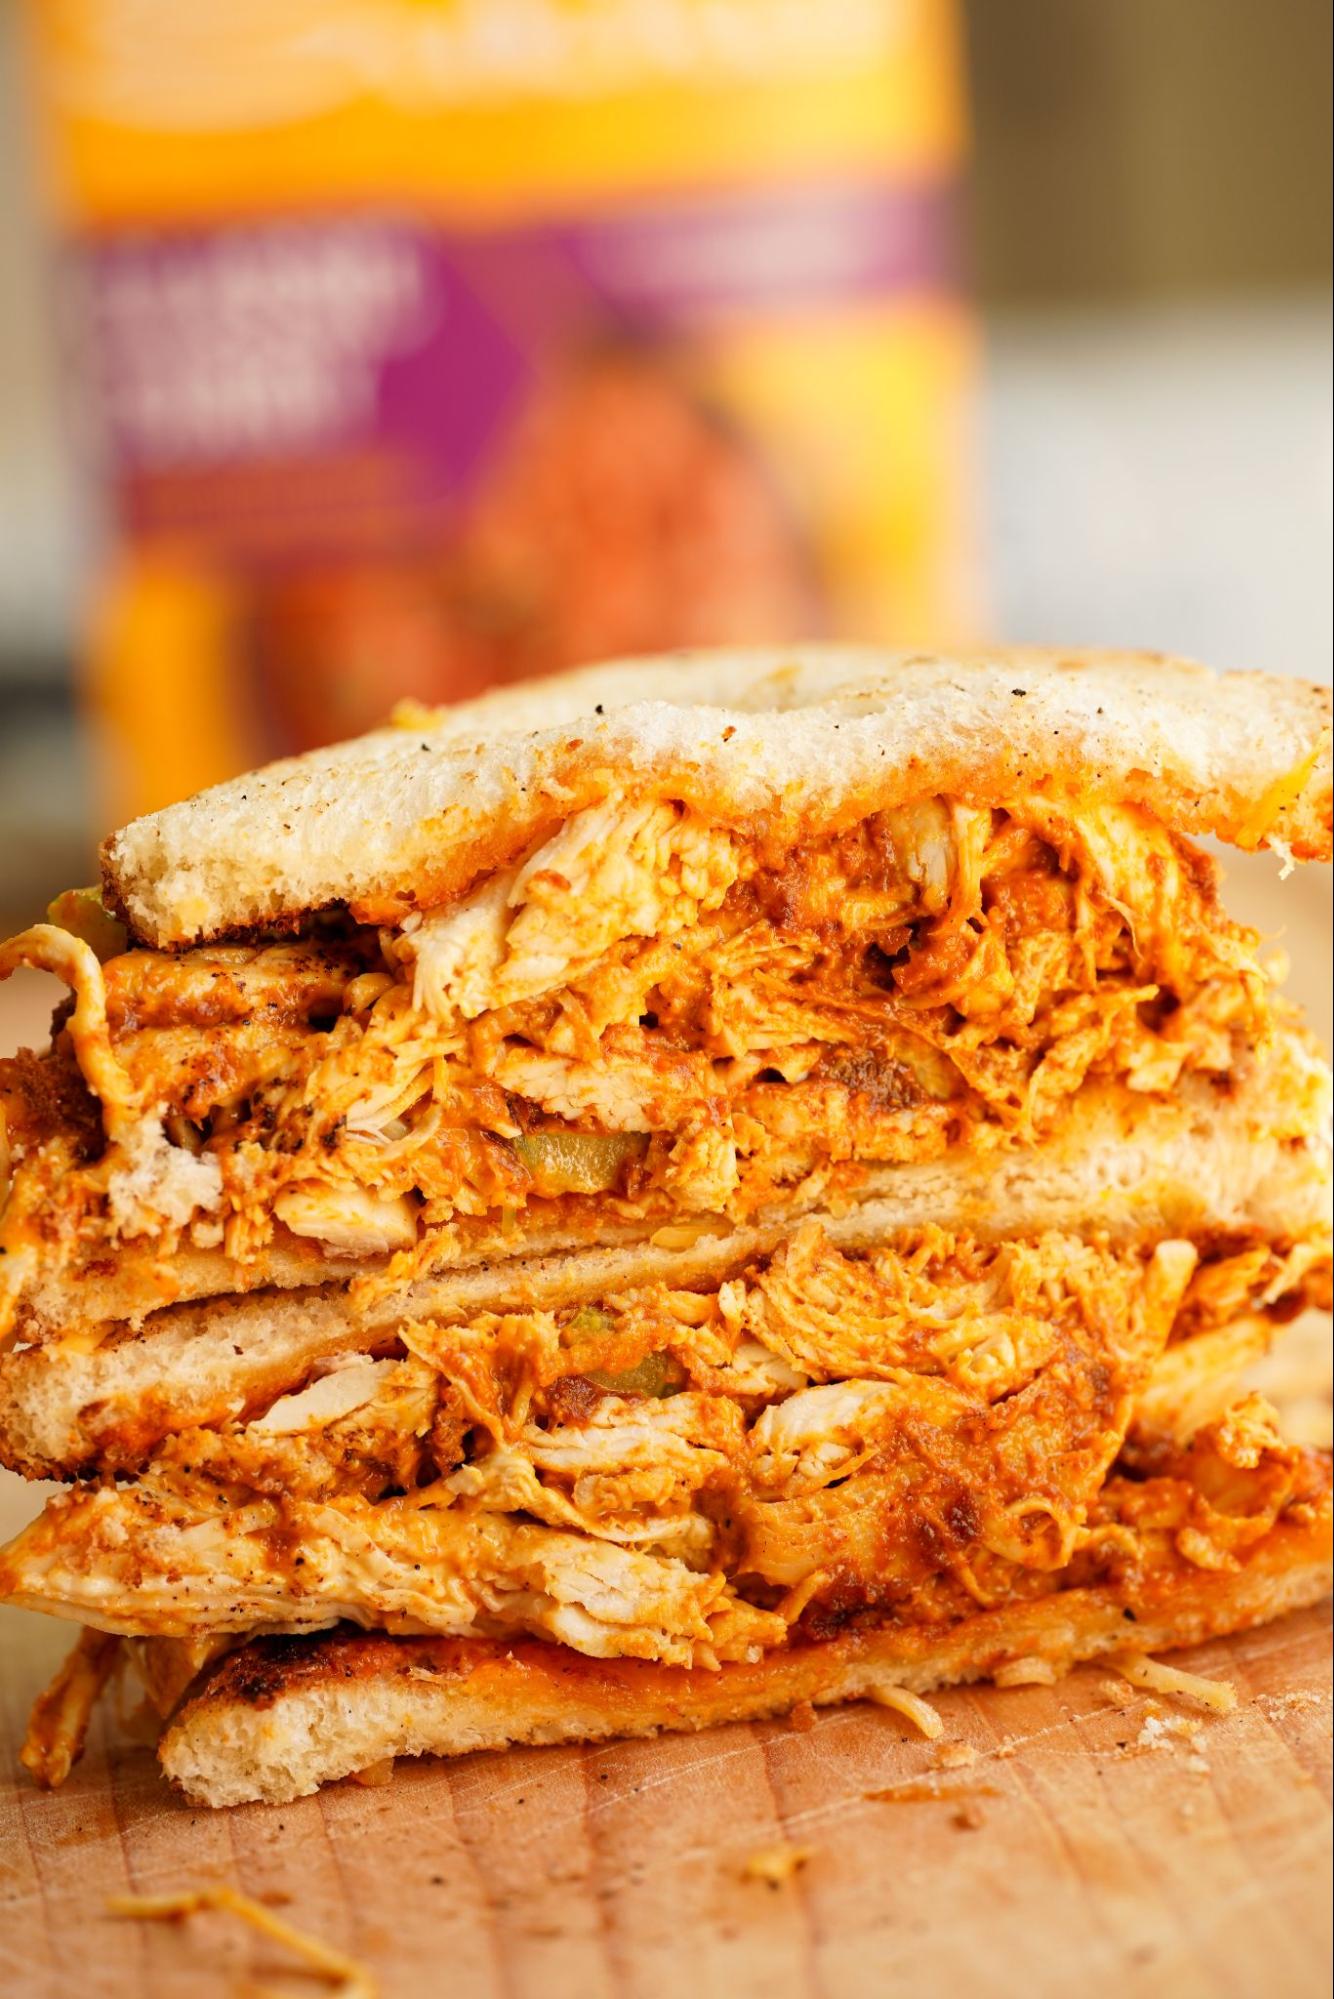 The Chicken Curry Melt: Irresistible Comfort Food